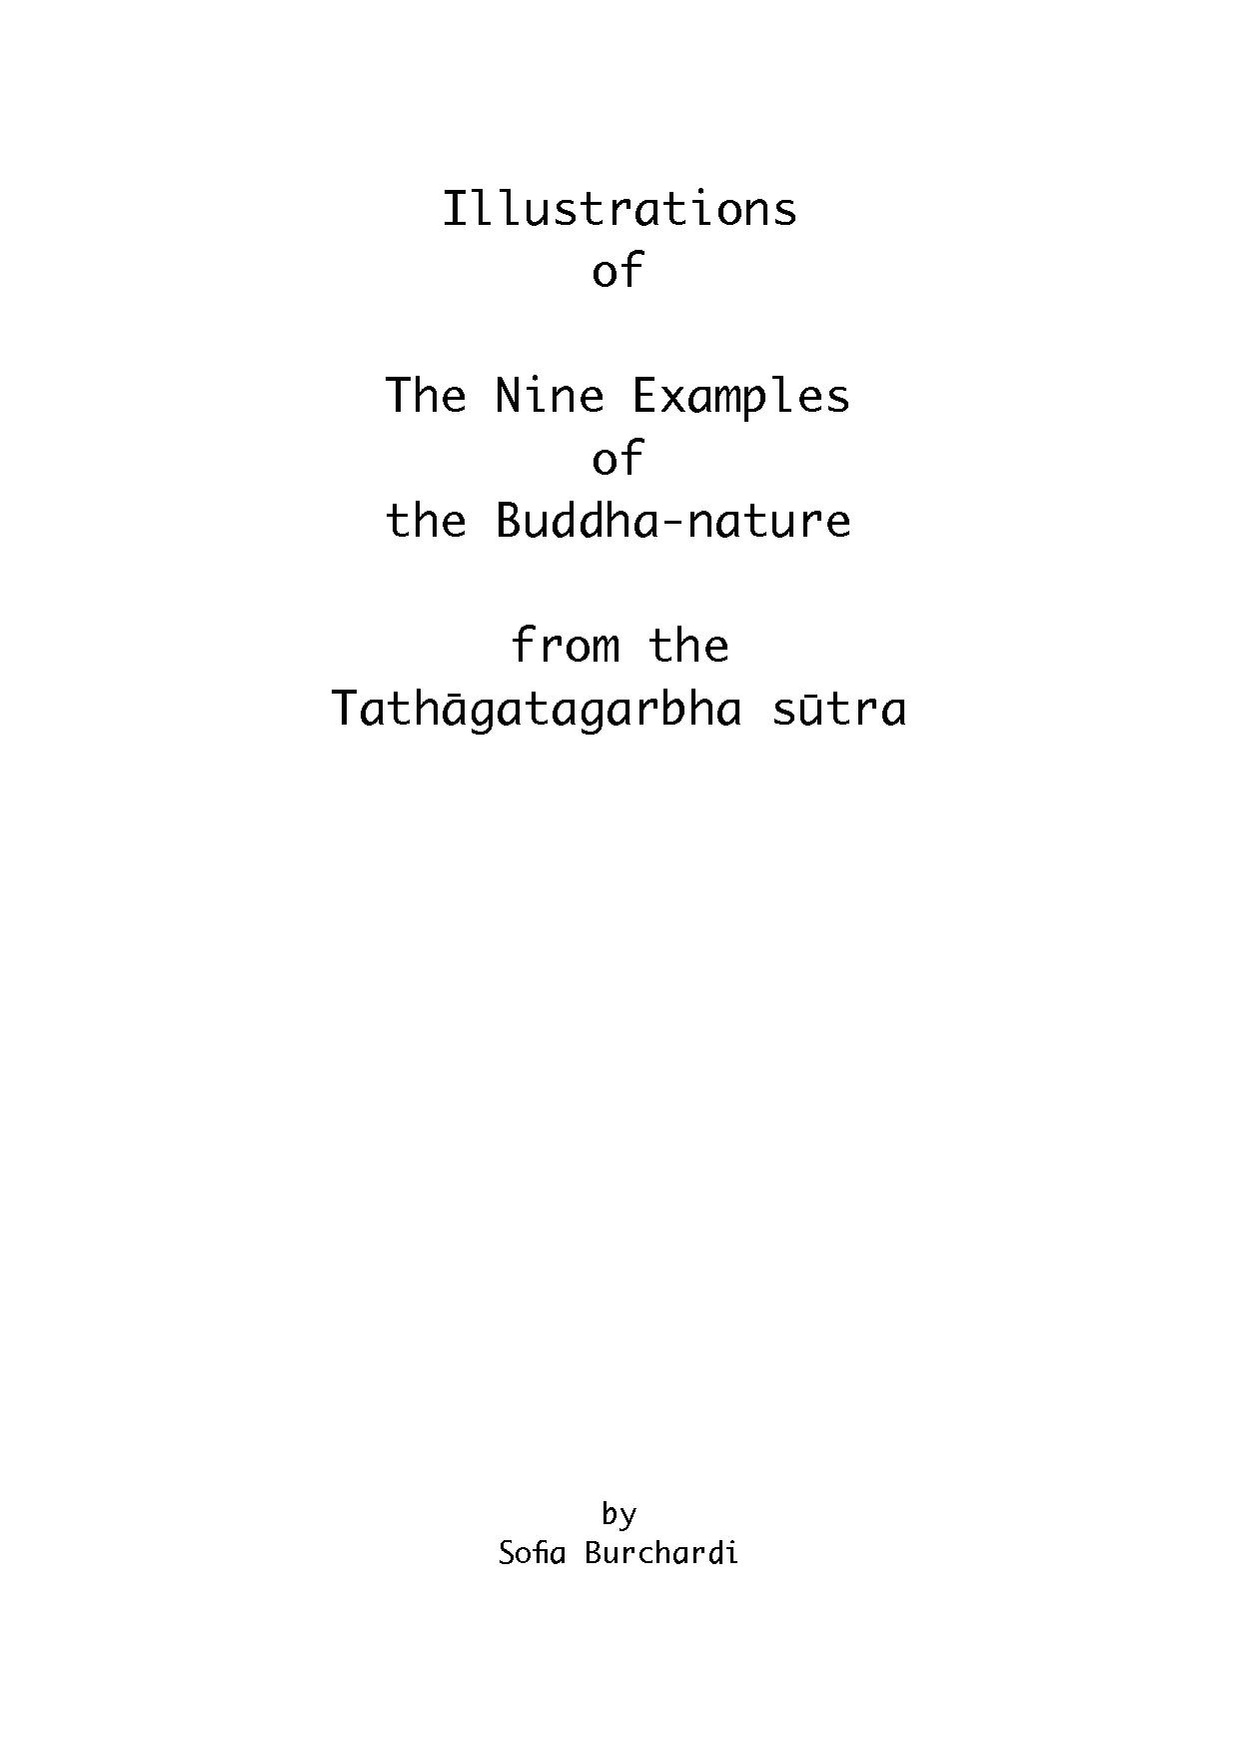 See an artists rendition of the traditional examples of buddha-nature